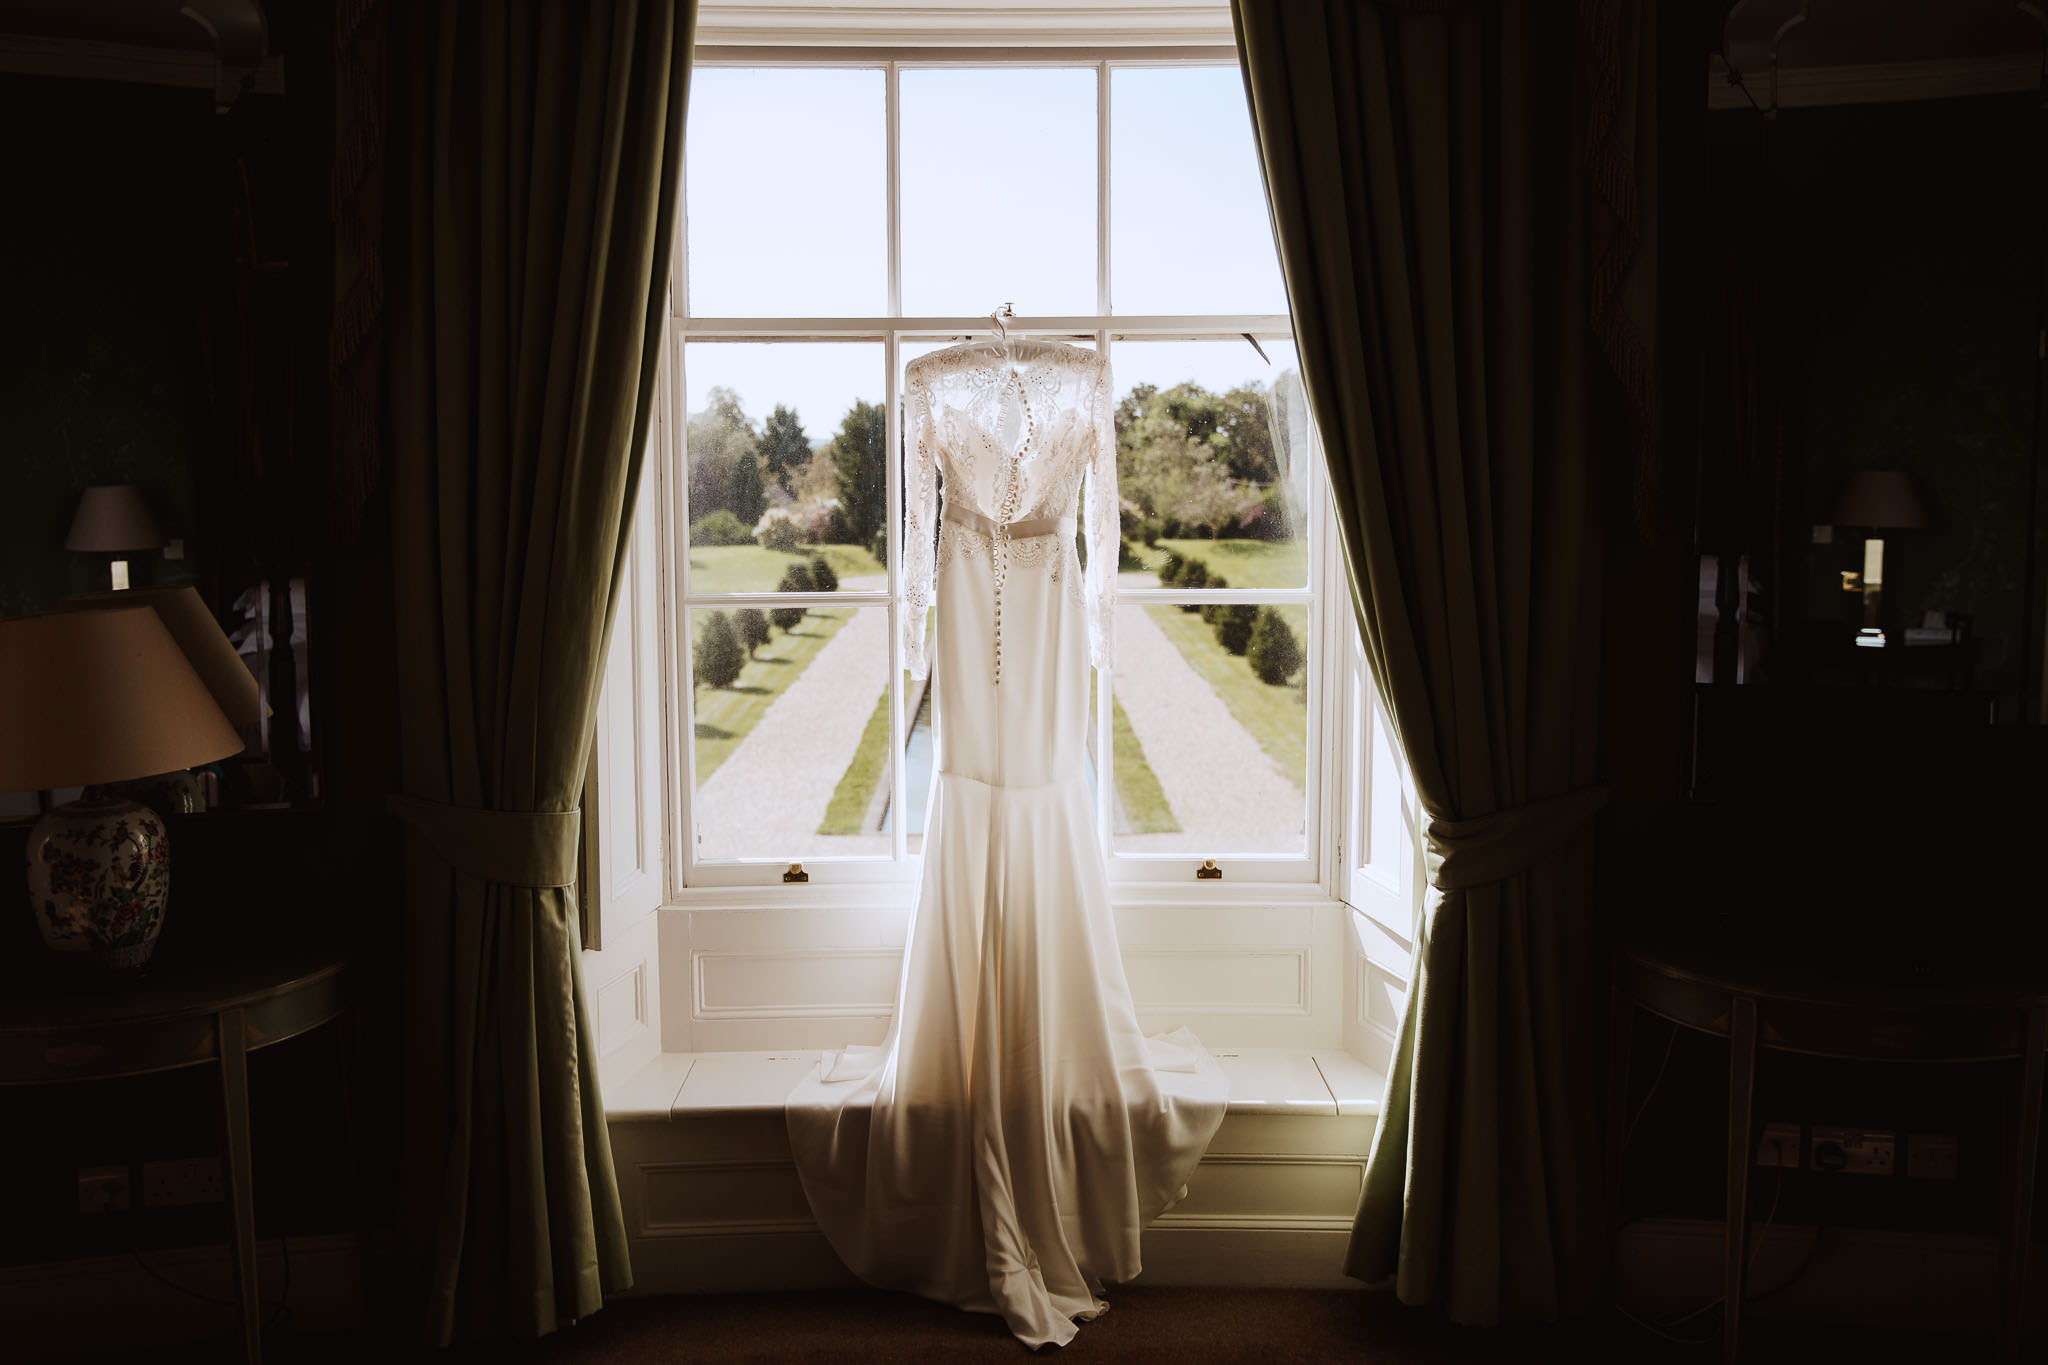 Suzanne Neville wedding dress hanging in the window of Stubton Hall